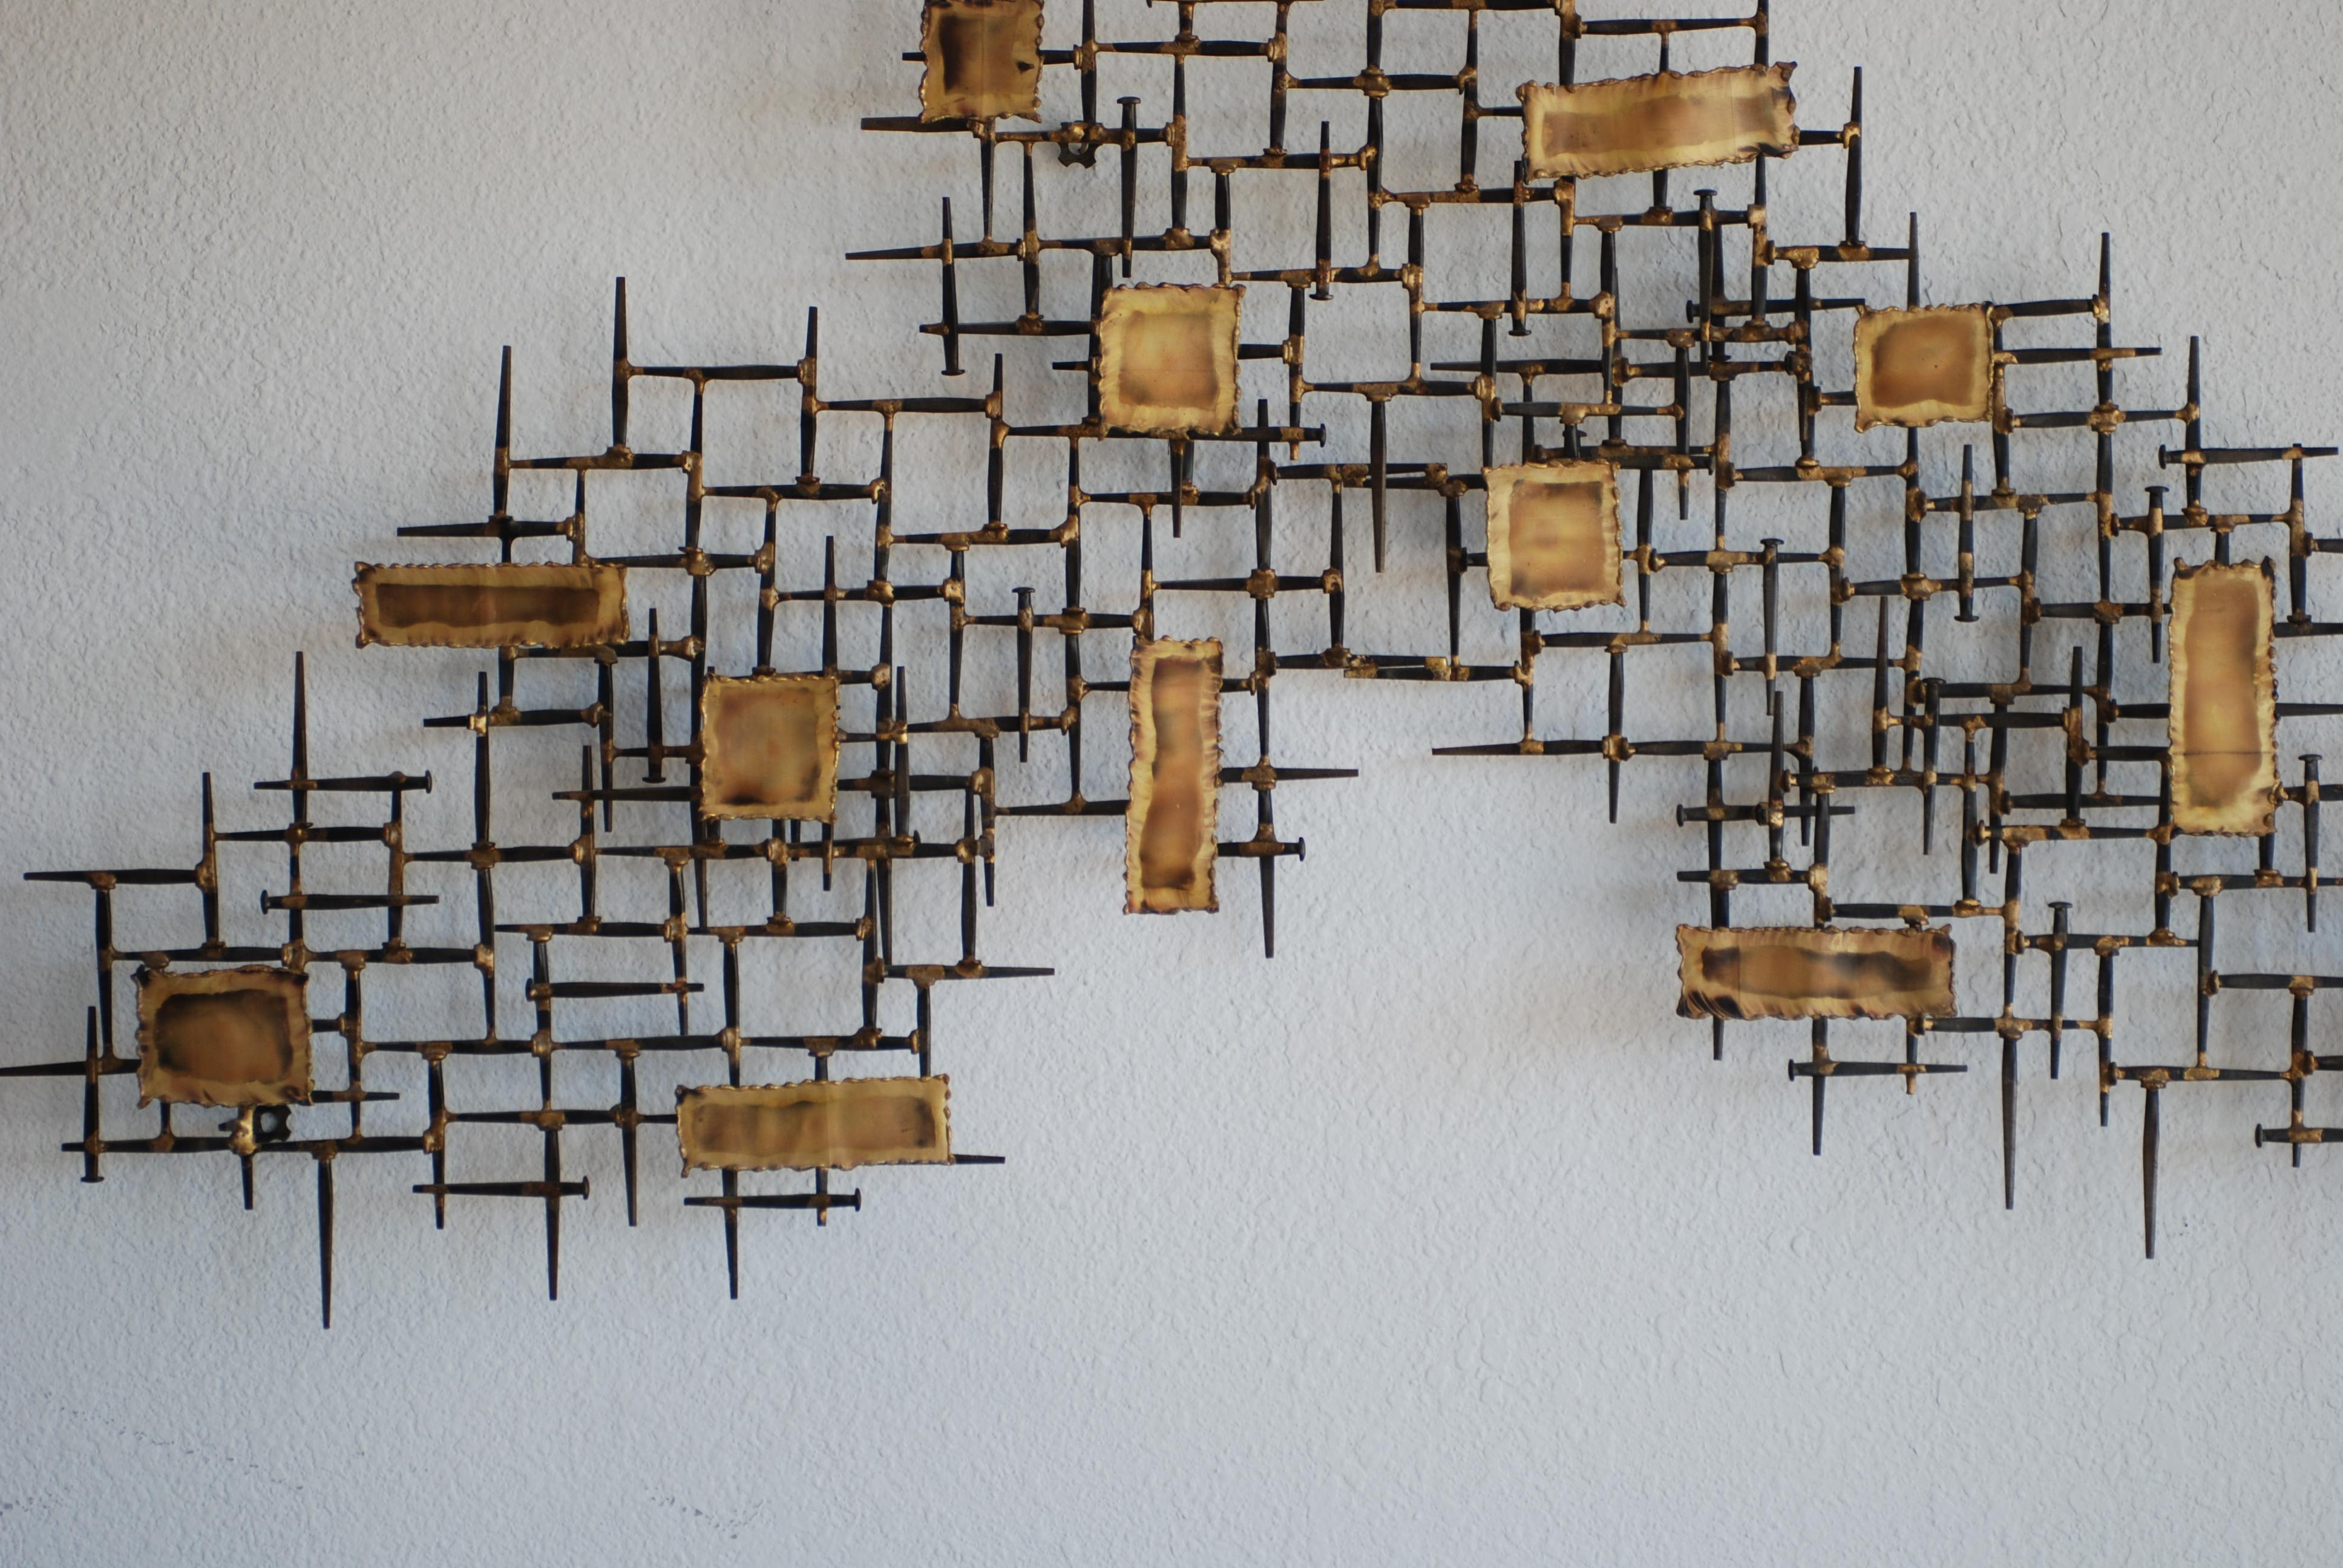 This nail art wall sculpture is signed MF. It is made of iron nails and elevated 'floating' metal panels with beautiful brass coloring.
The mixed metal tones throughout give the work dimension and versatility.